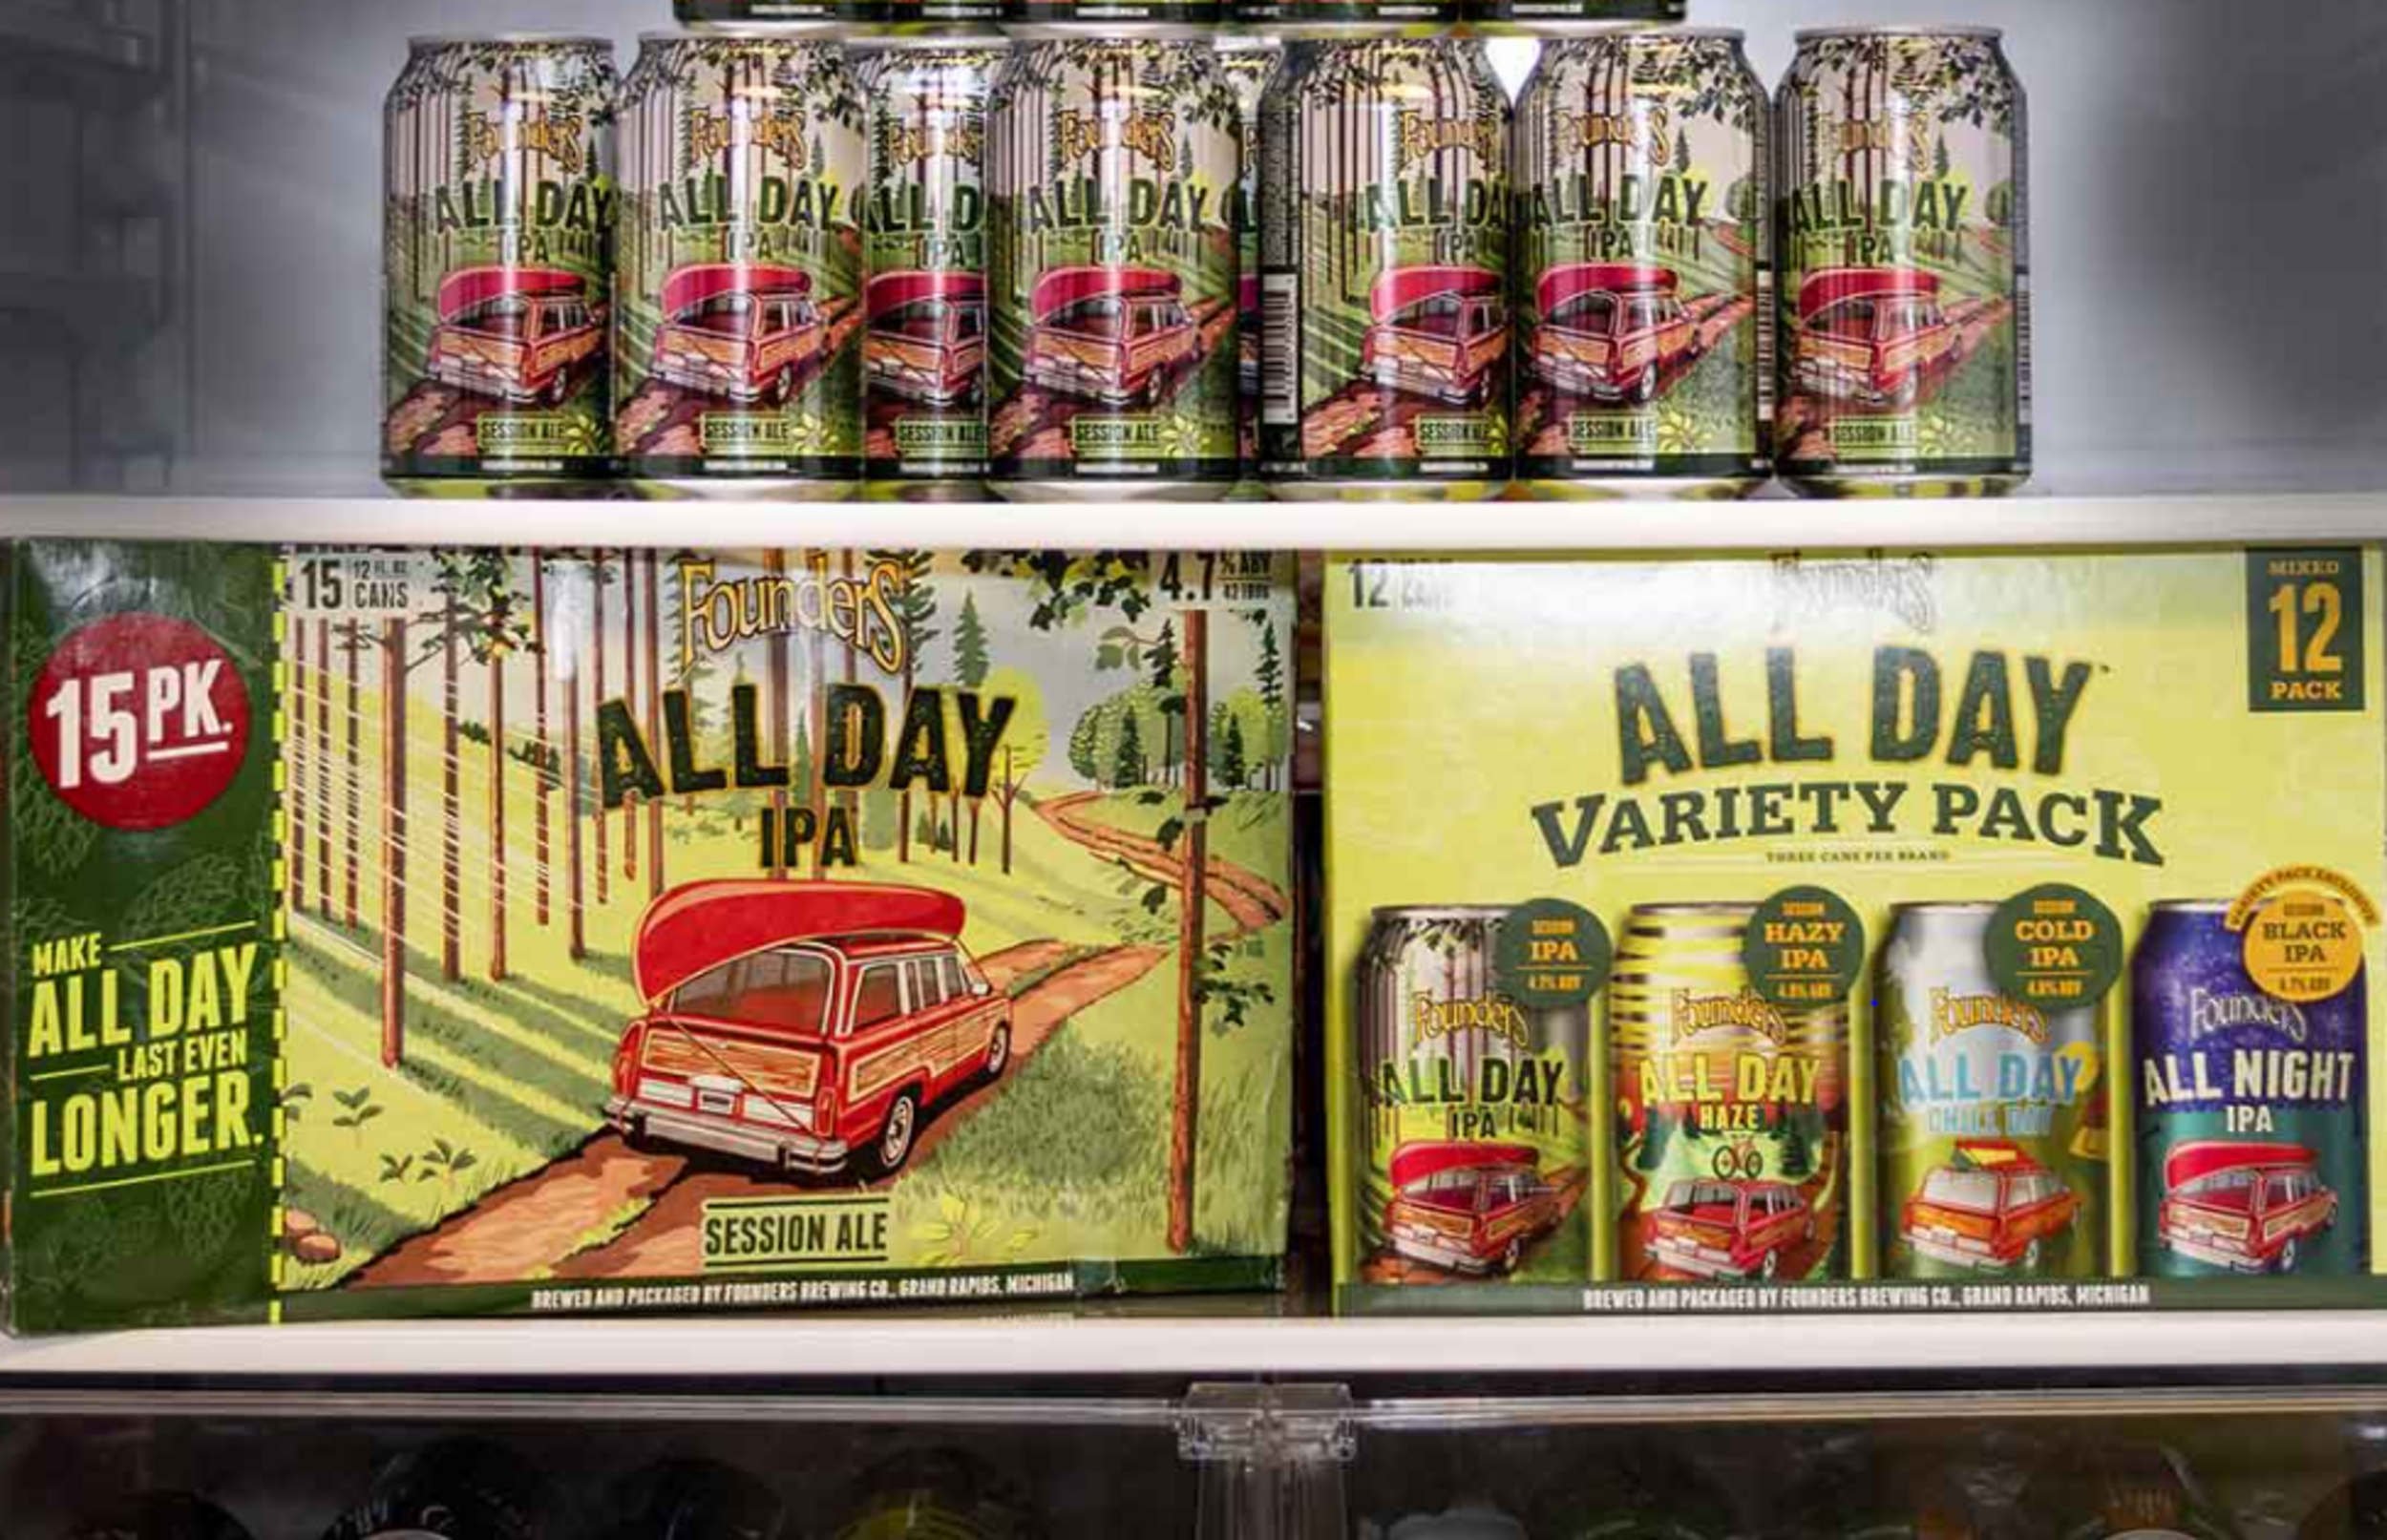 <p>Their All Day IPA is among the top-selling craft beers in the country. Founders lay claim to being one of the biggest breweries in the state and infuse their Michigan heritage in all of their beers. Their Grand Rapids facility features all of their core beers along with plenty of taproom exclusives, which — along with their unique building that formerly was a trucking depot — makes Founders a must-visit when near the Great Lakes State. </p><p>You may also like: <a href='https://www.yardbarker.com/lifestyle/articles/20_easy_ways_to_make_your_home_more_sustainable_030624/s1__35657762'>20 easy ways to make your home more sustainable</a></p>